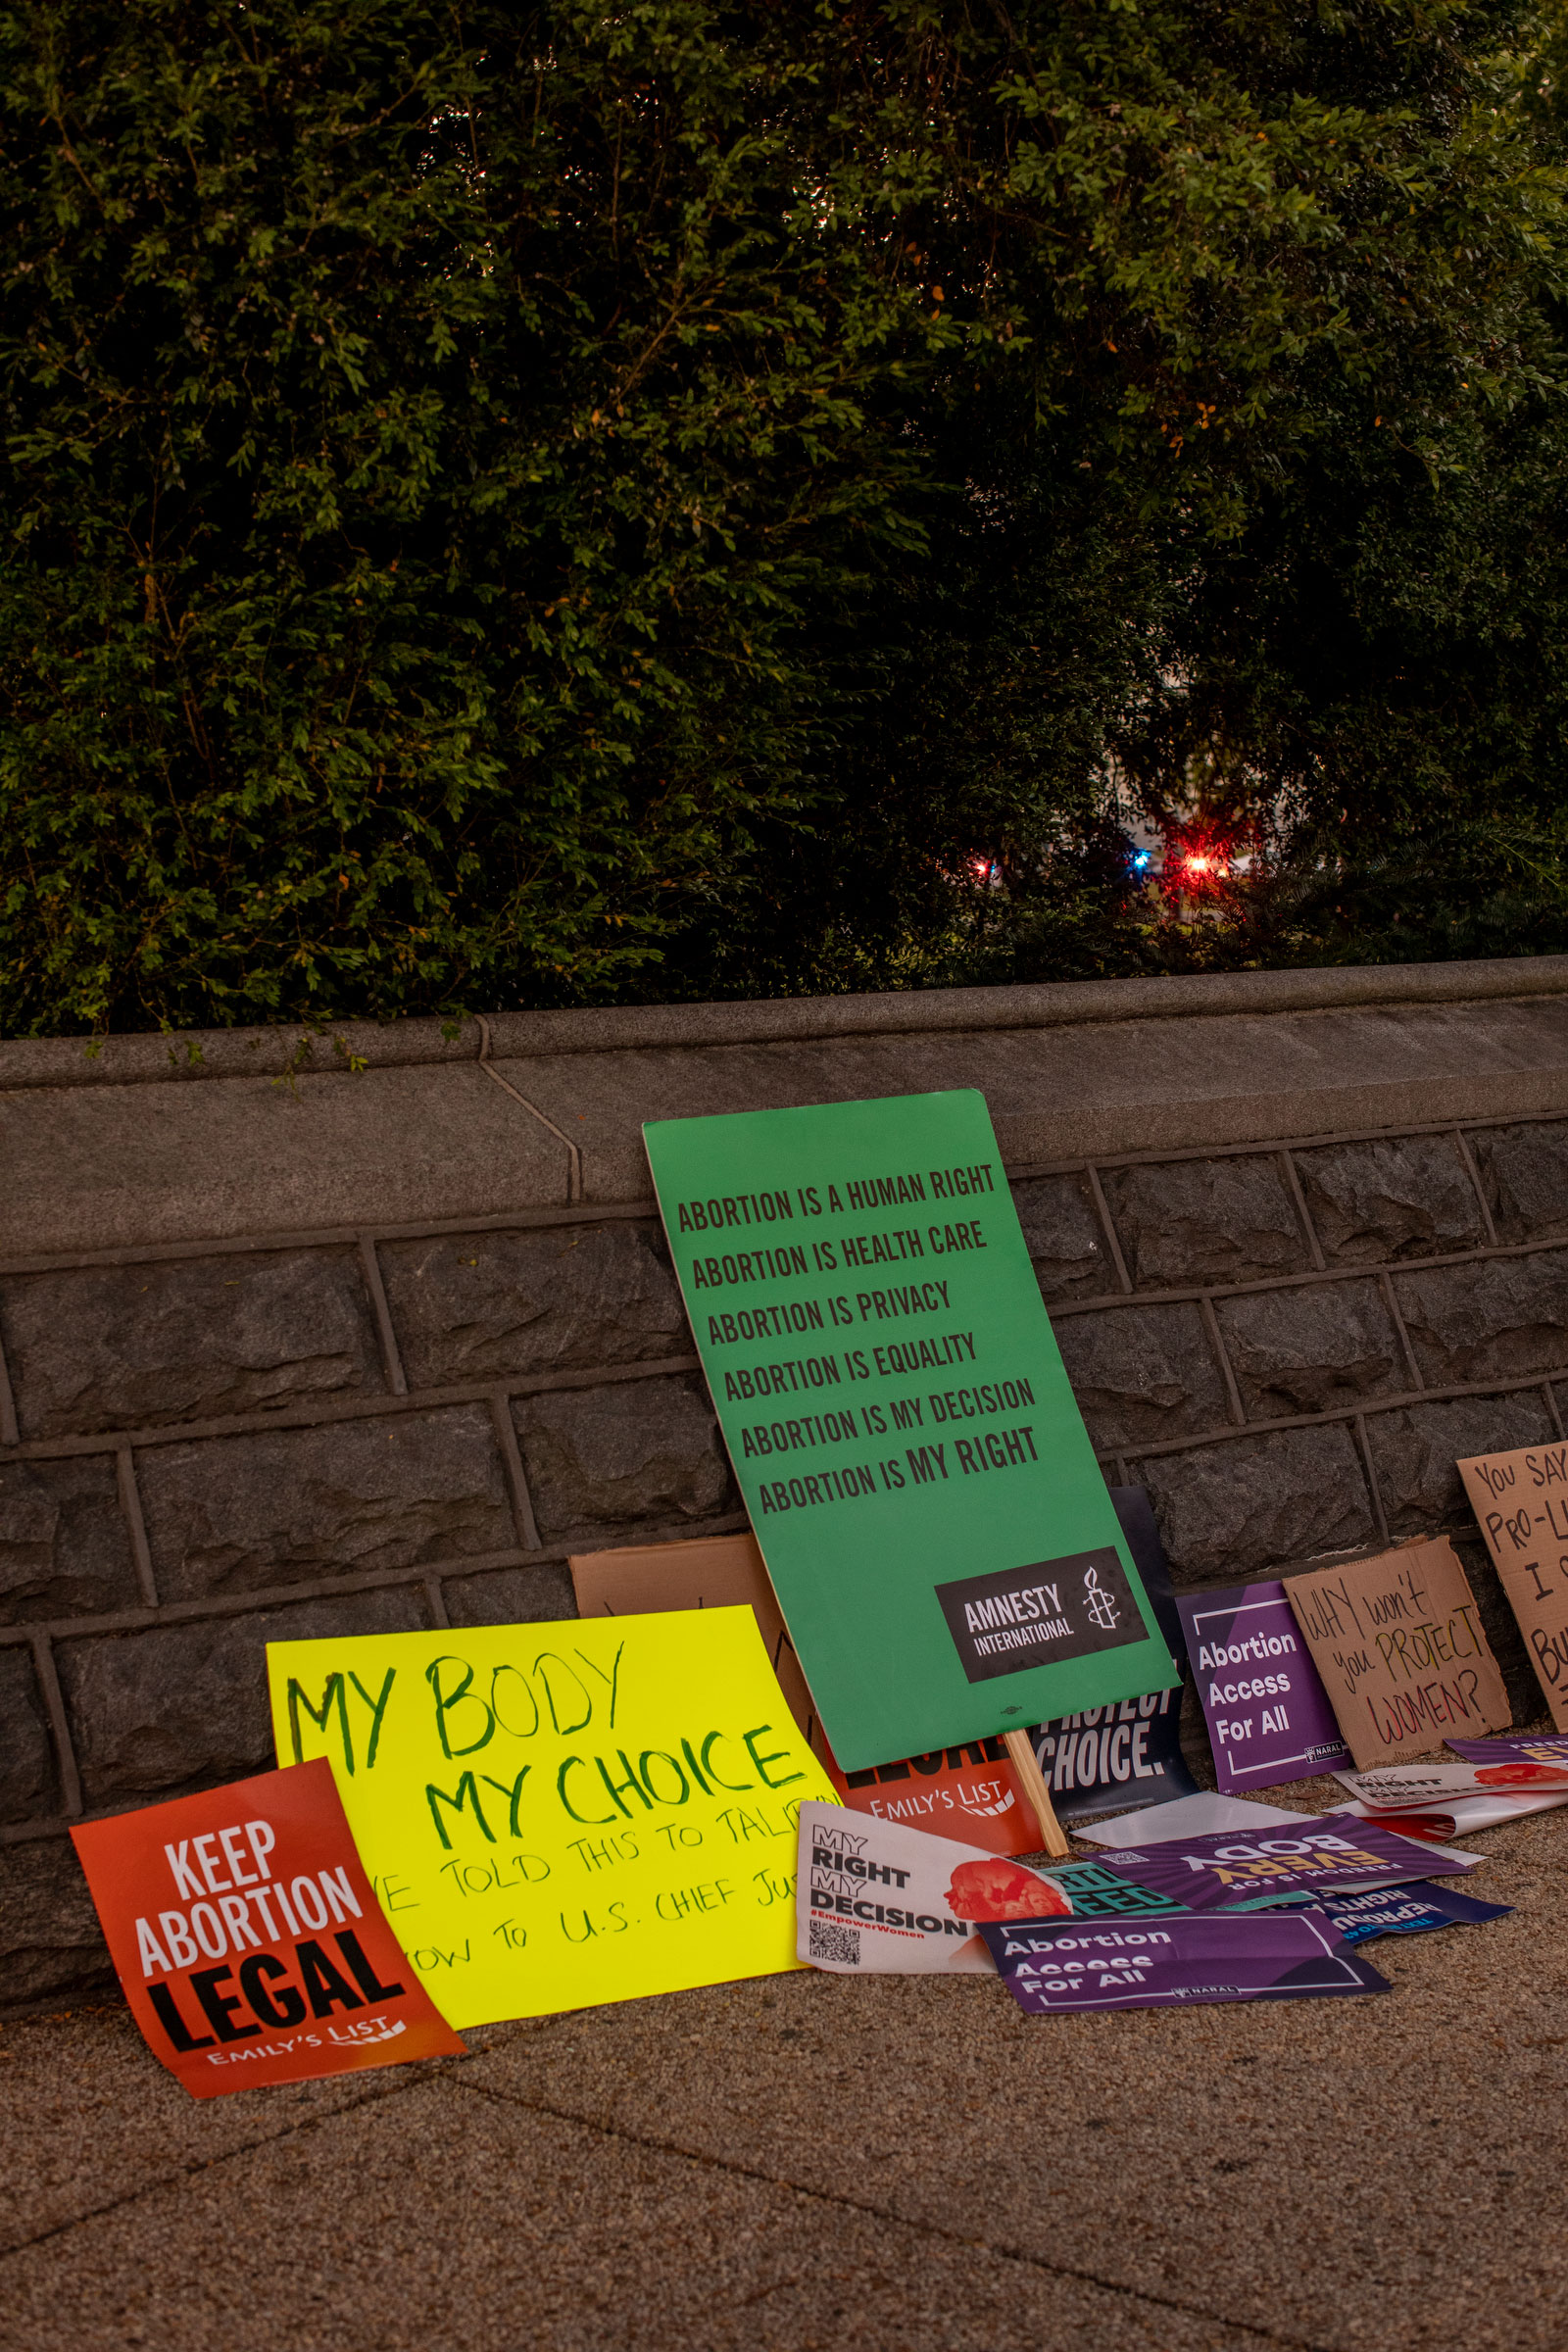 Abortion-rights signs are lined up across the street from the Supreme Court following the decision to overturn Roe v Wade on June 24, 2022 in Washington, D.C. (Jason Andrew for Time)